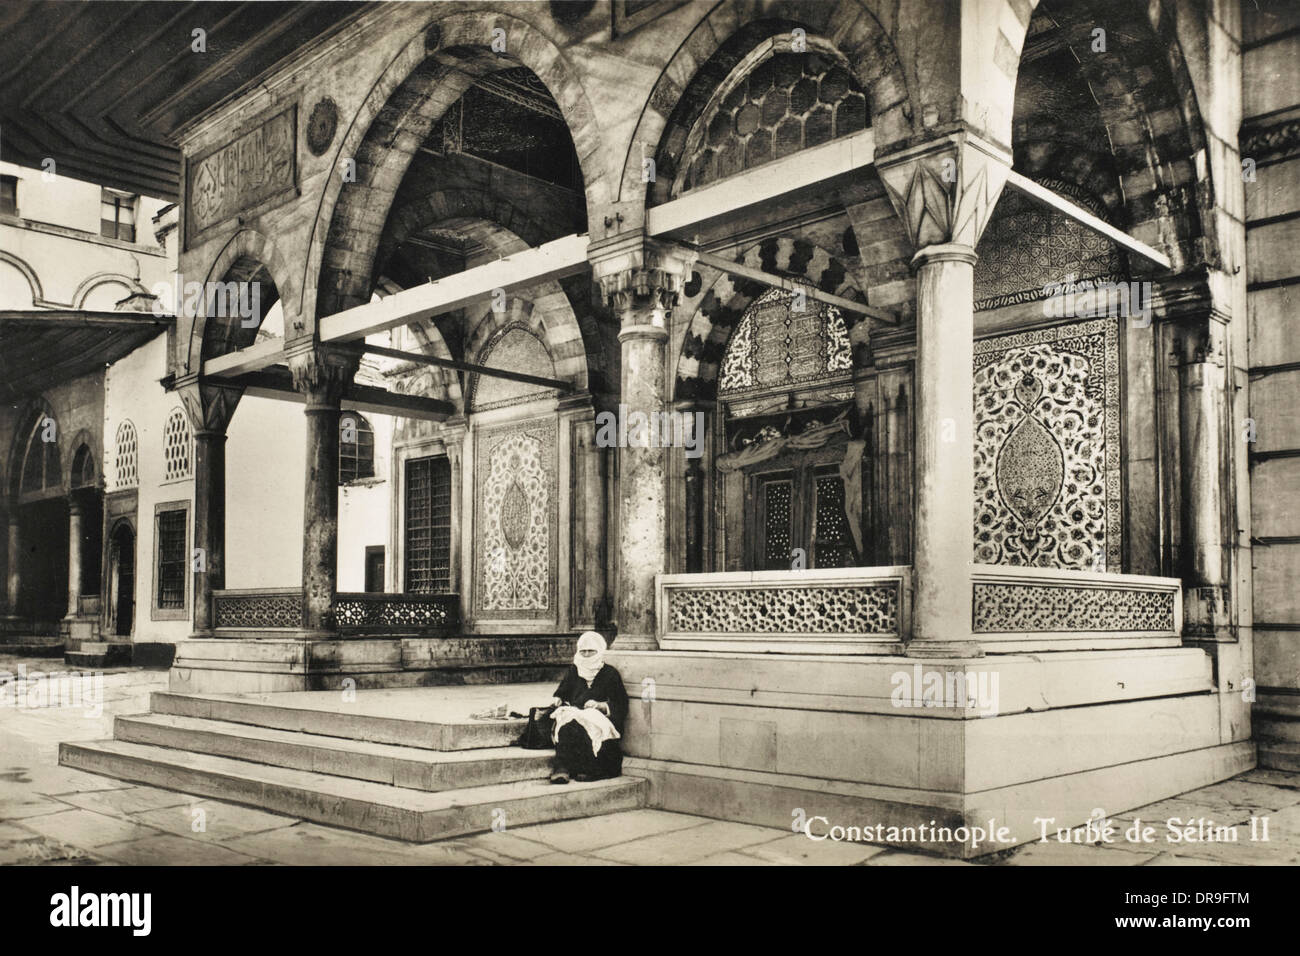 The tomb of Sultan Selim II - Constantinople Stock Photo